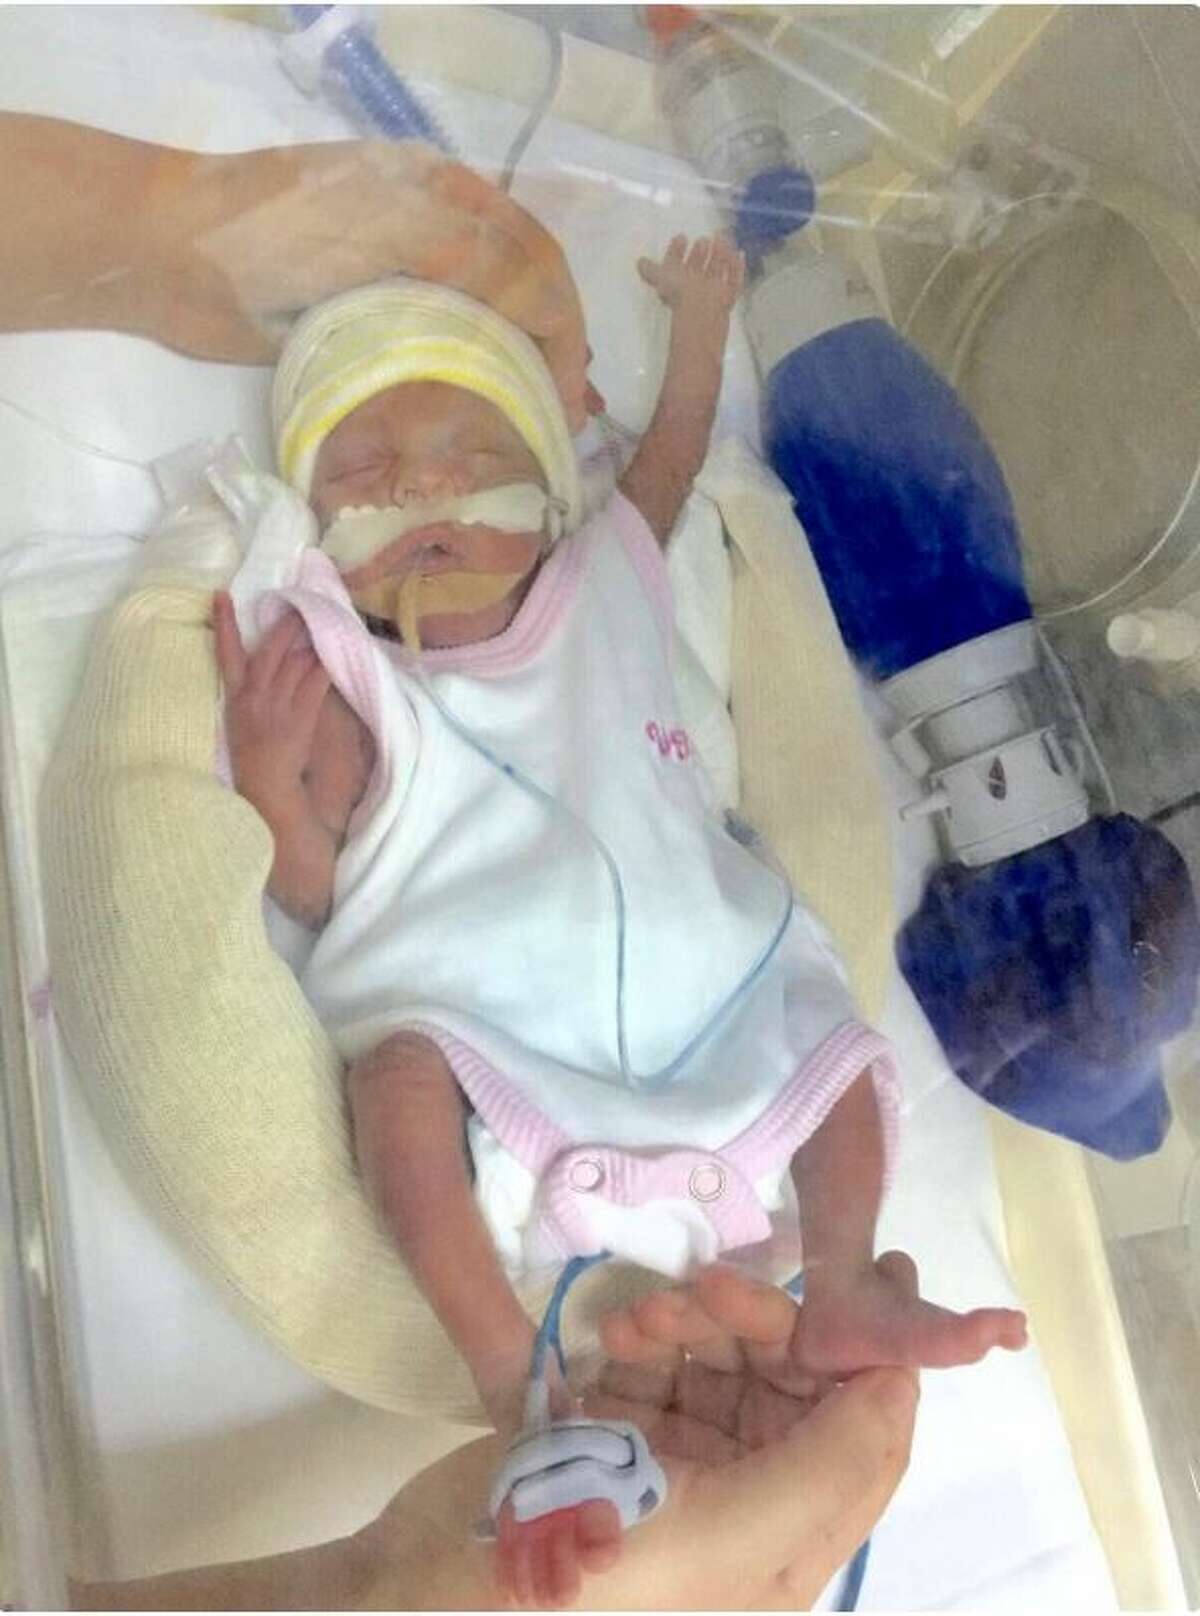 Baby Mia Villalonga came into the world 12 weeks early, weighing only a pound and a half, more than 6,000 miles away from home — leaving her parents stranded on vacation and struggling to pay for the costs of healthcare, according to a GoFundMe page started by her parents.